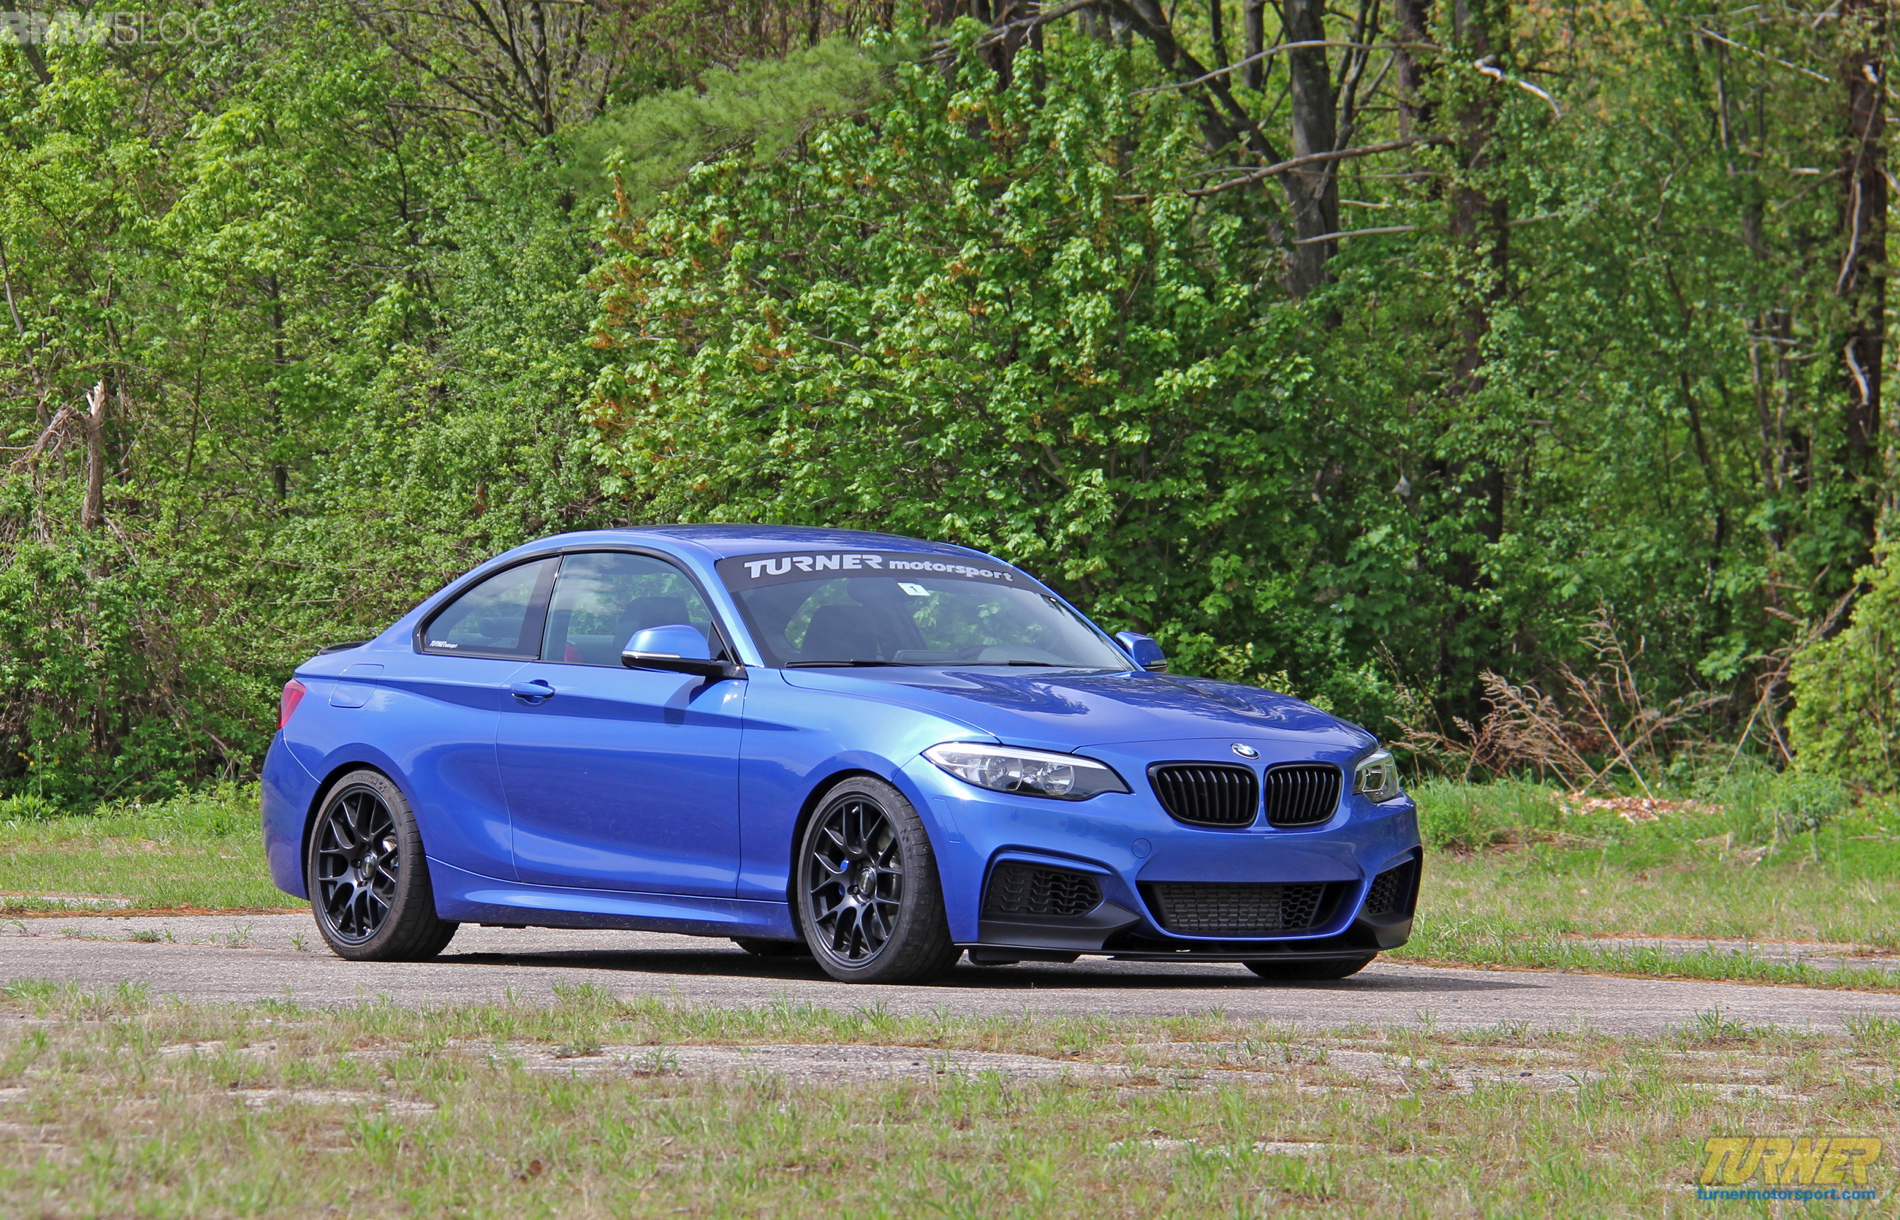 Turner Motorsport Tuning Program Carried Out on the F22 BMW 228i Coupe